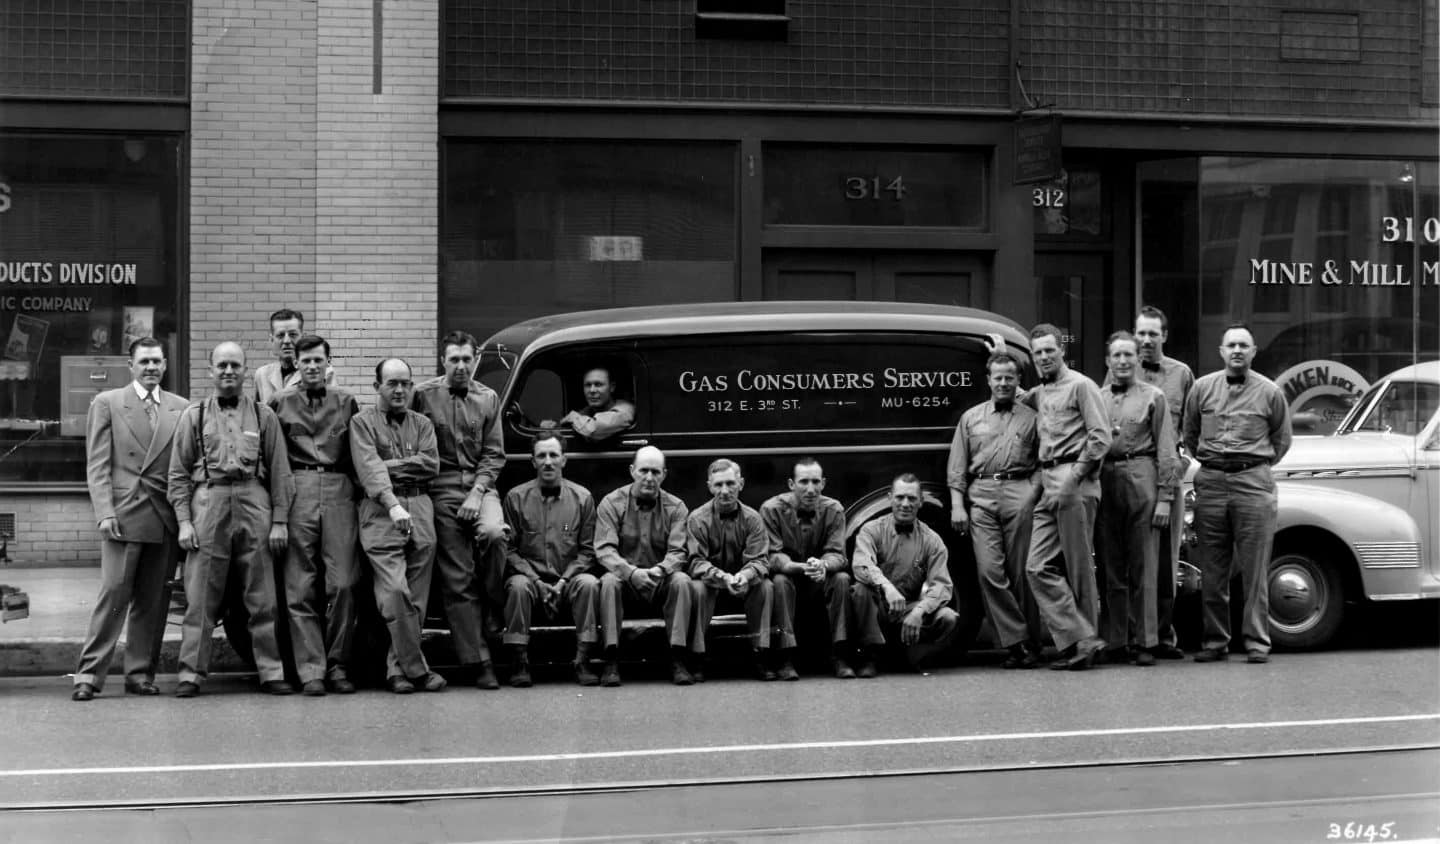 Gas Consumers Service employees posing by an old work van